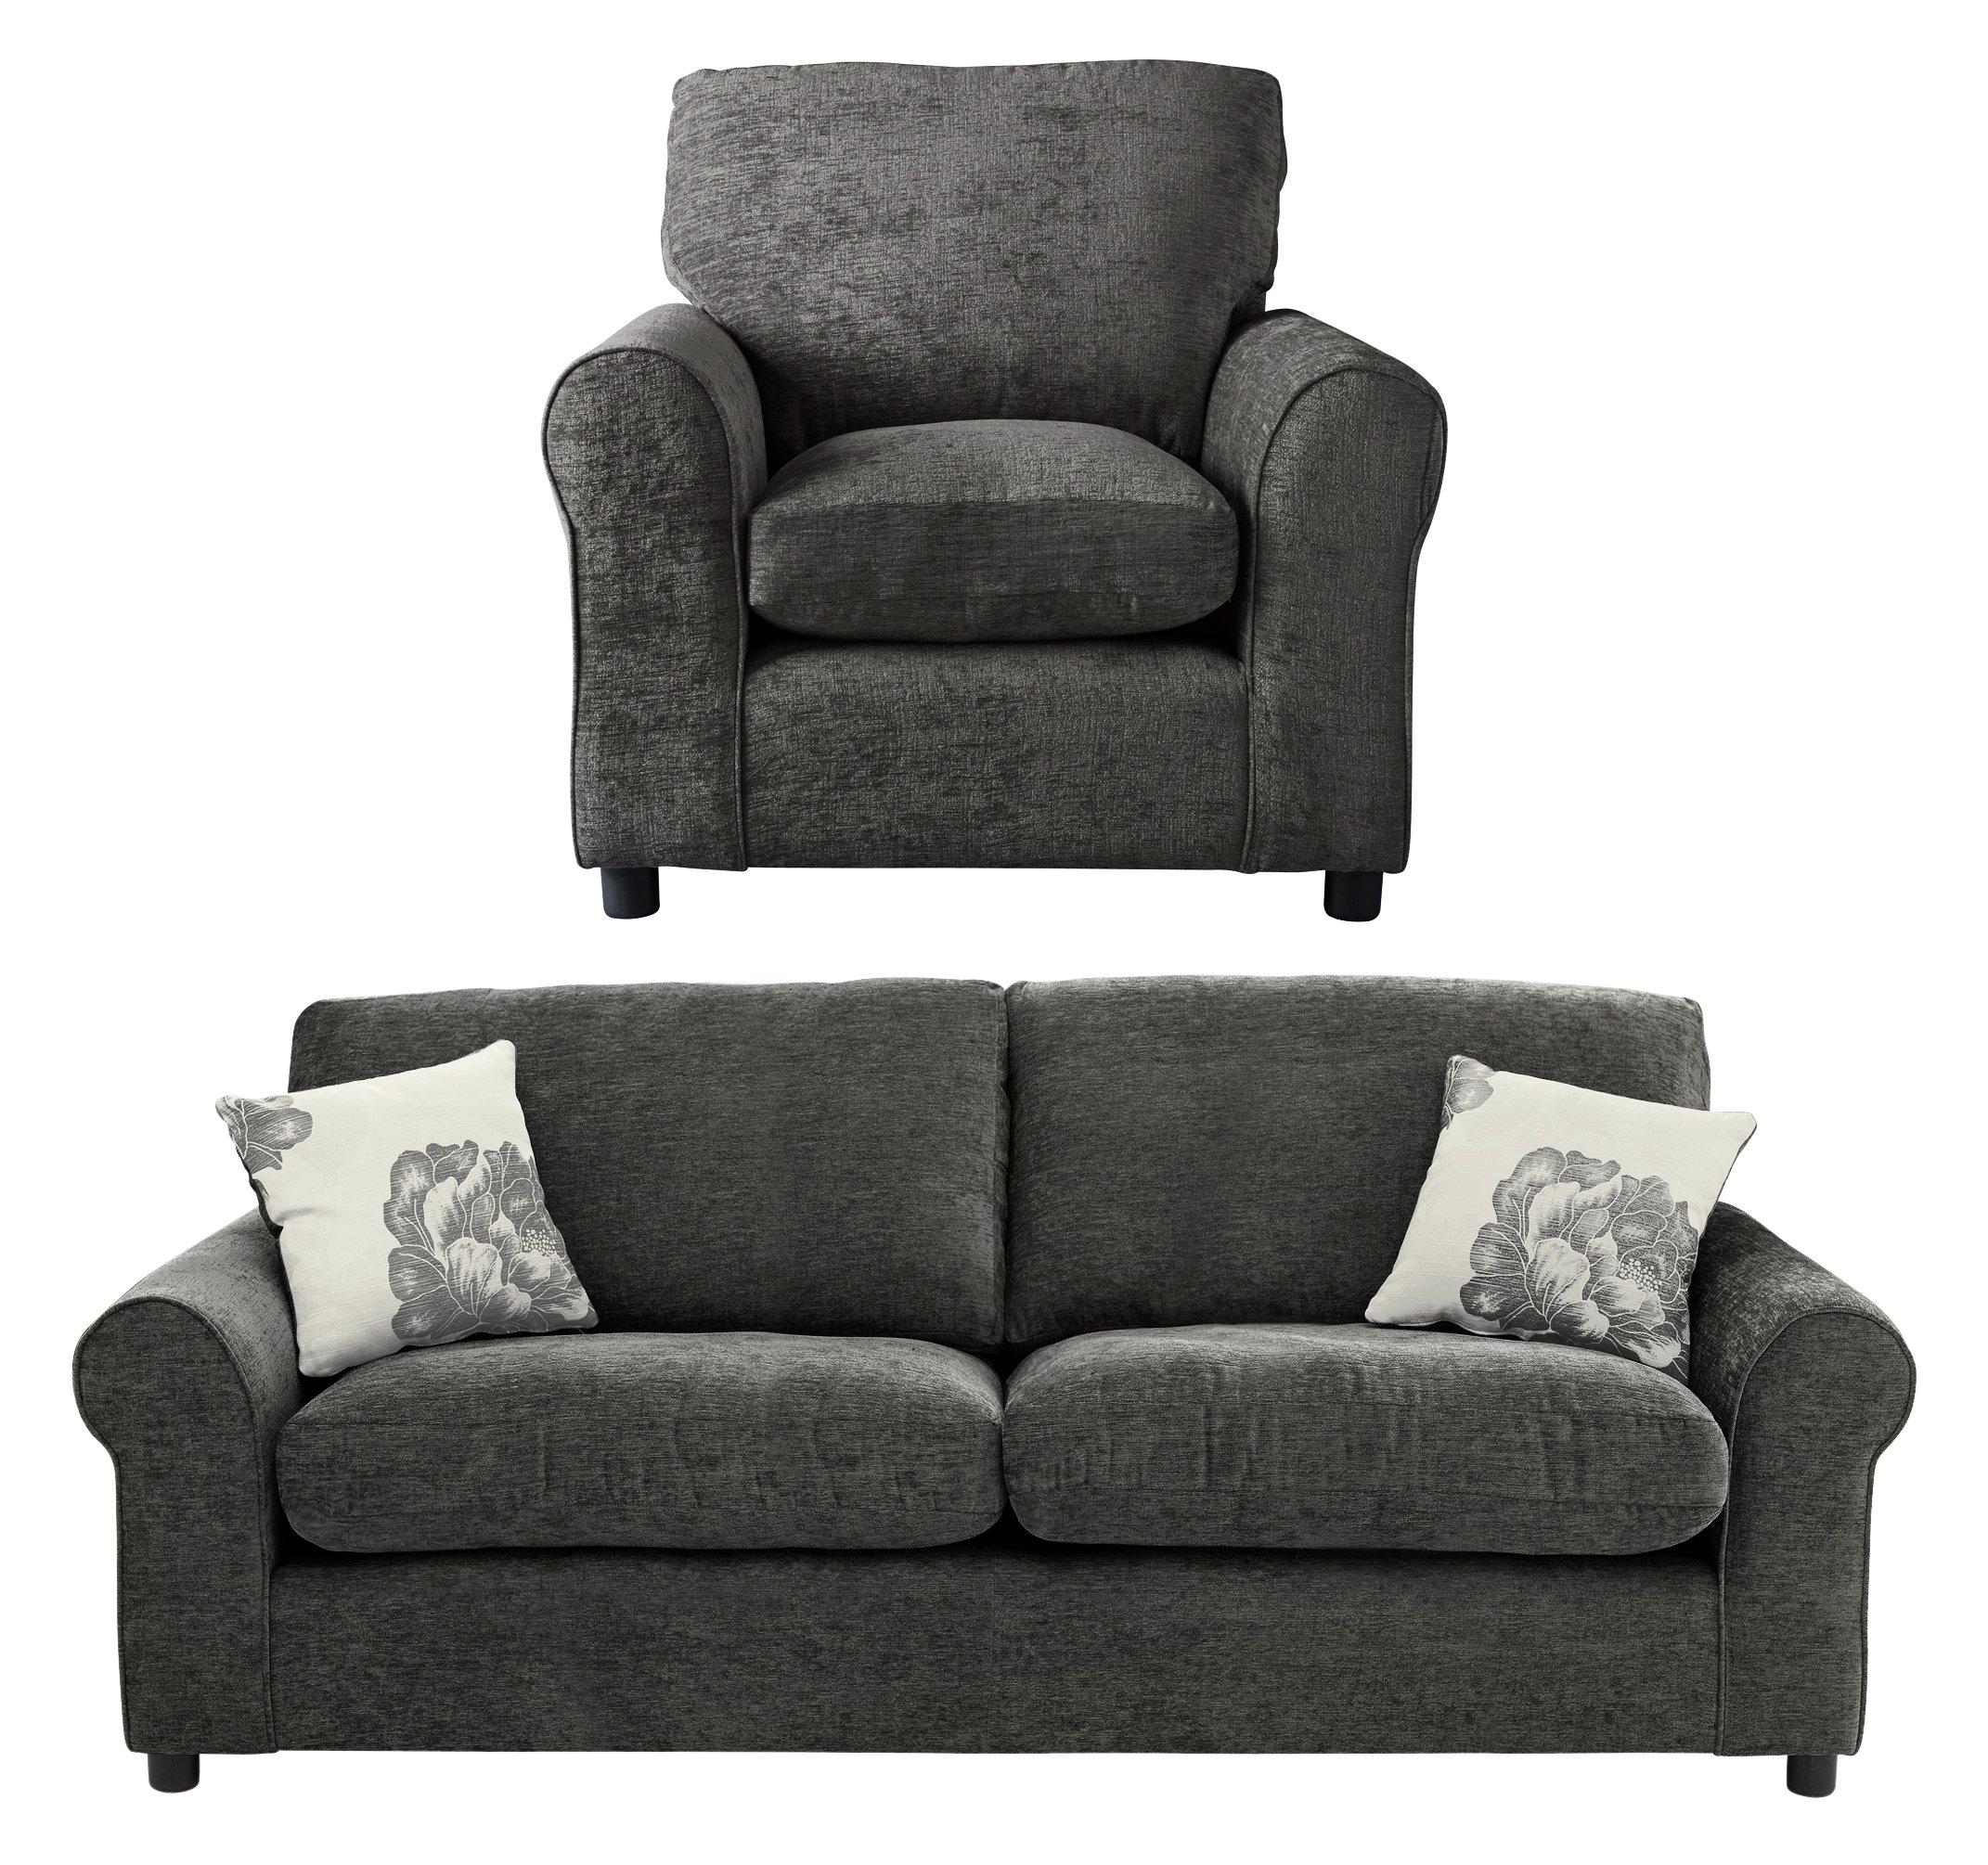 Buy HOME Eleanor Fabric Chair - Charcoal at Argos.co.uk - Your Online